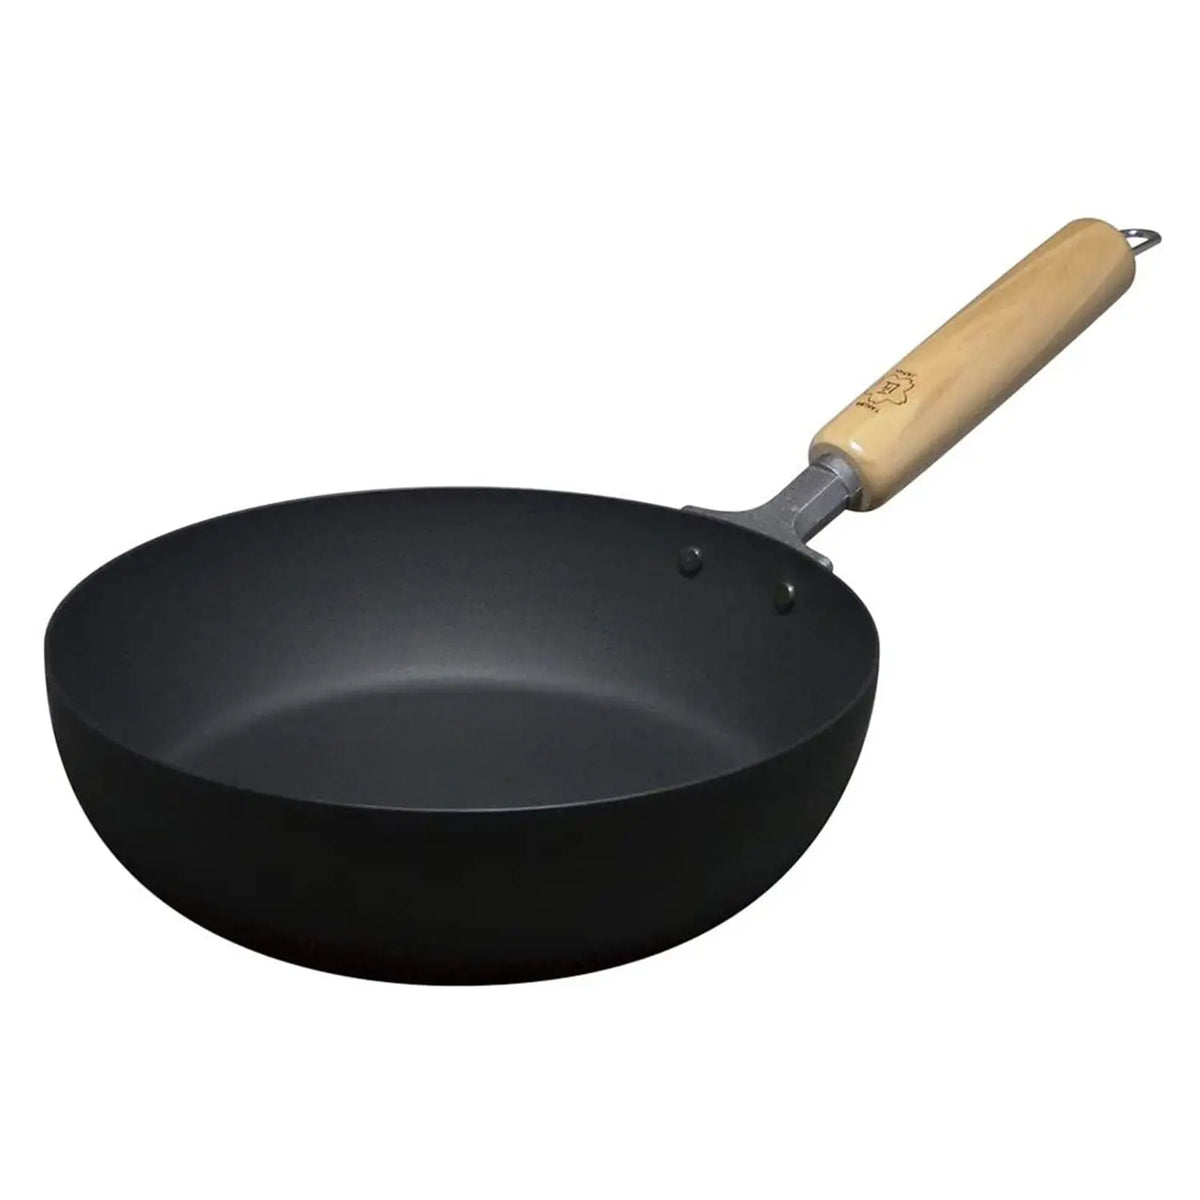 Source cast iron Chinese cooking ware heavy duty non stick indian